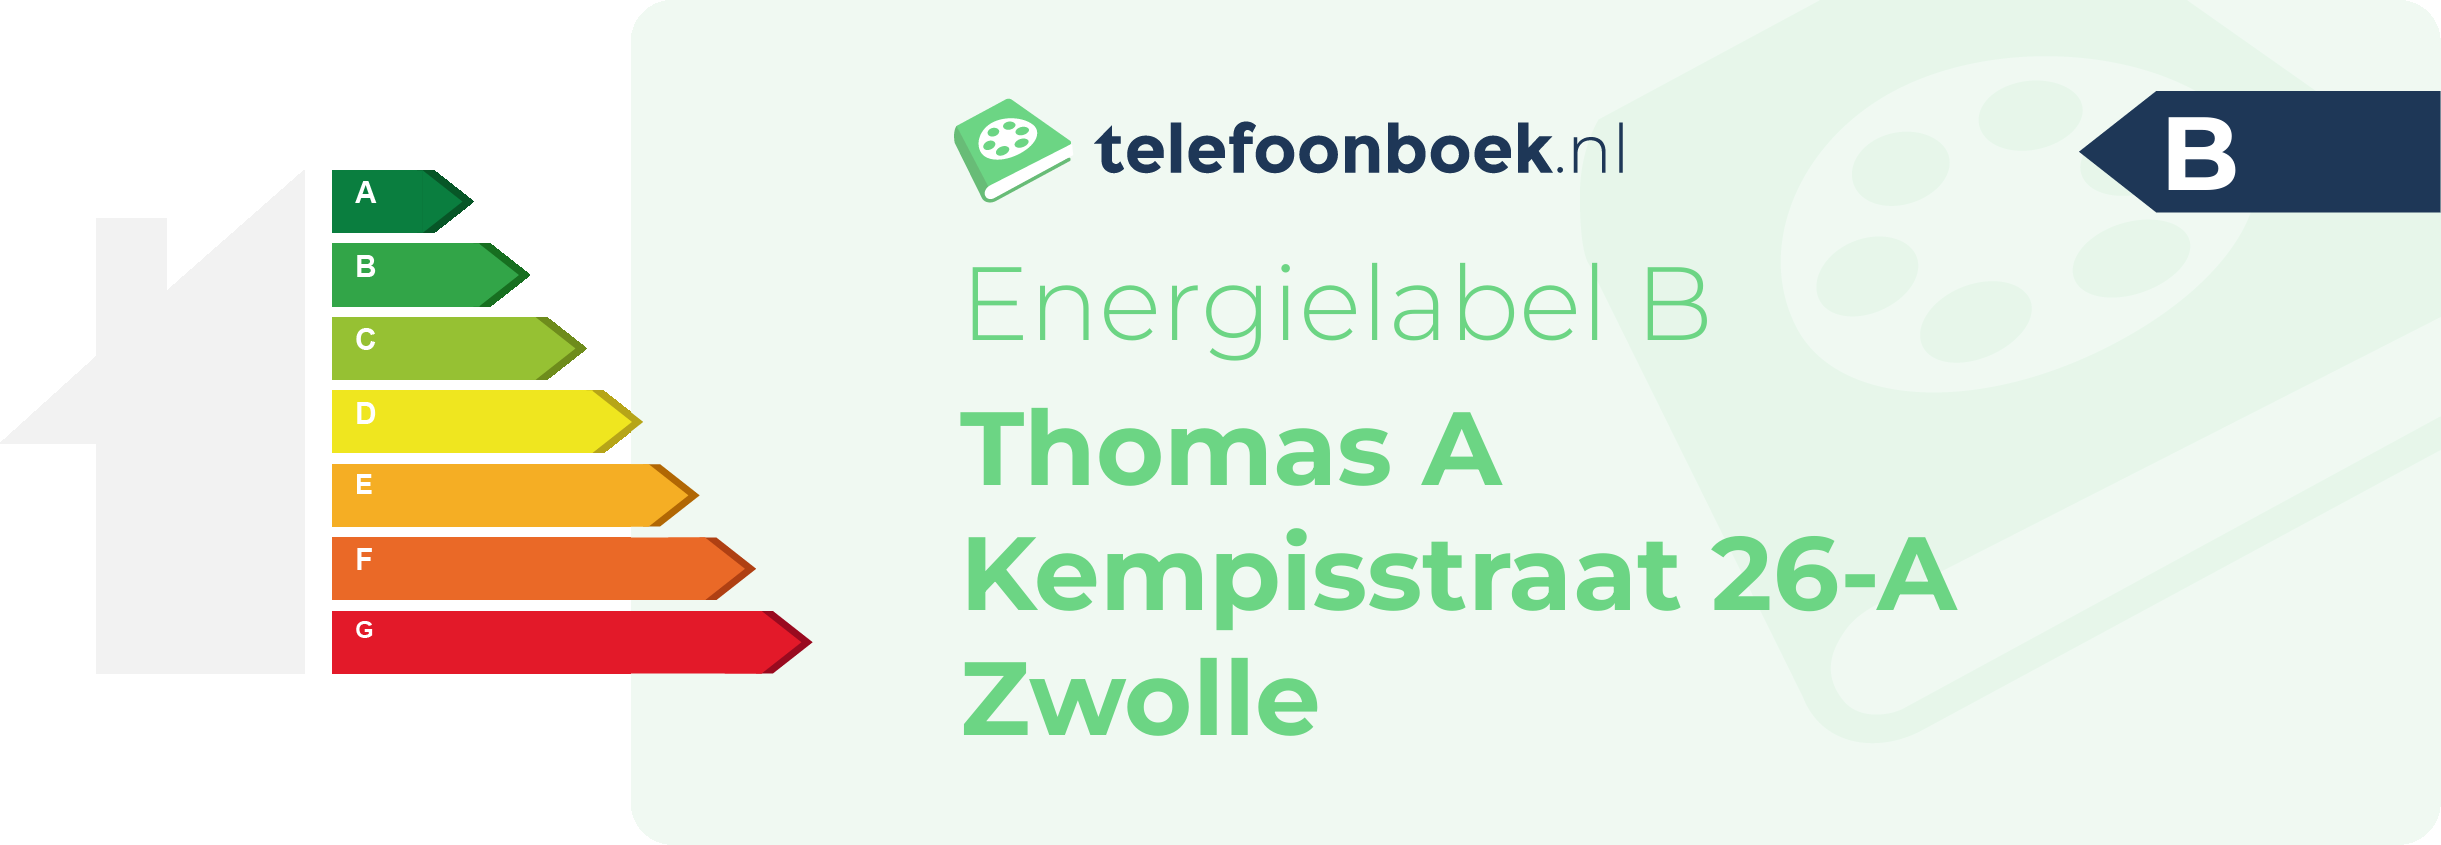 Energielabel Thomas A Kempisstraat 26-A Zwolle